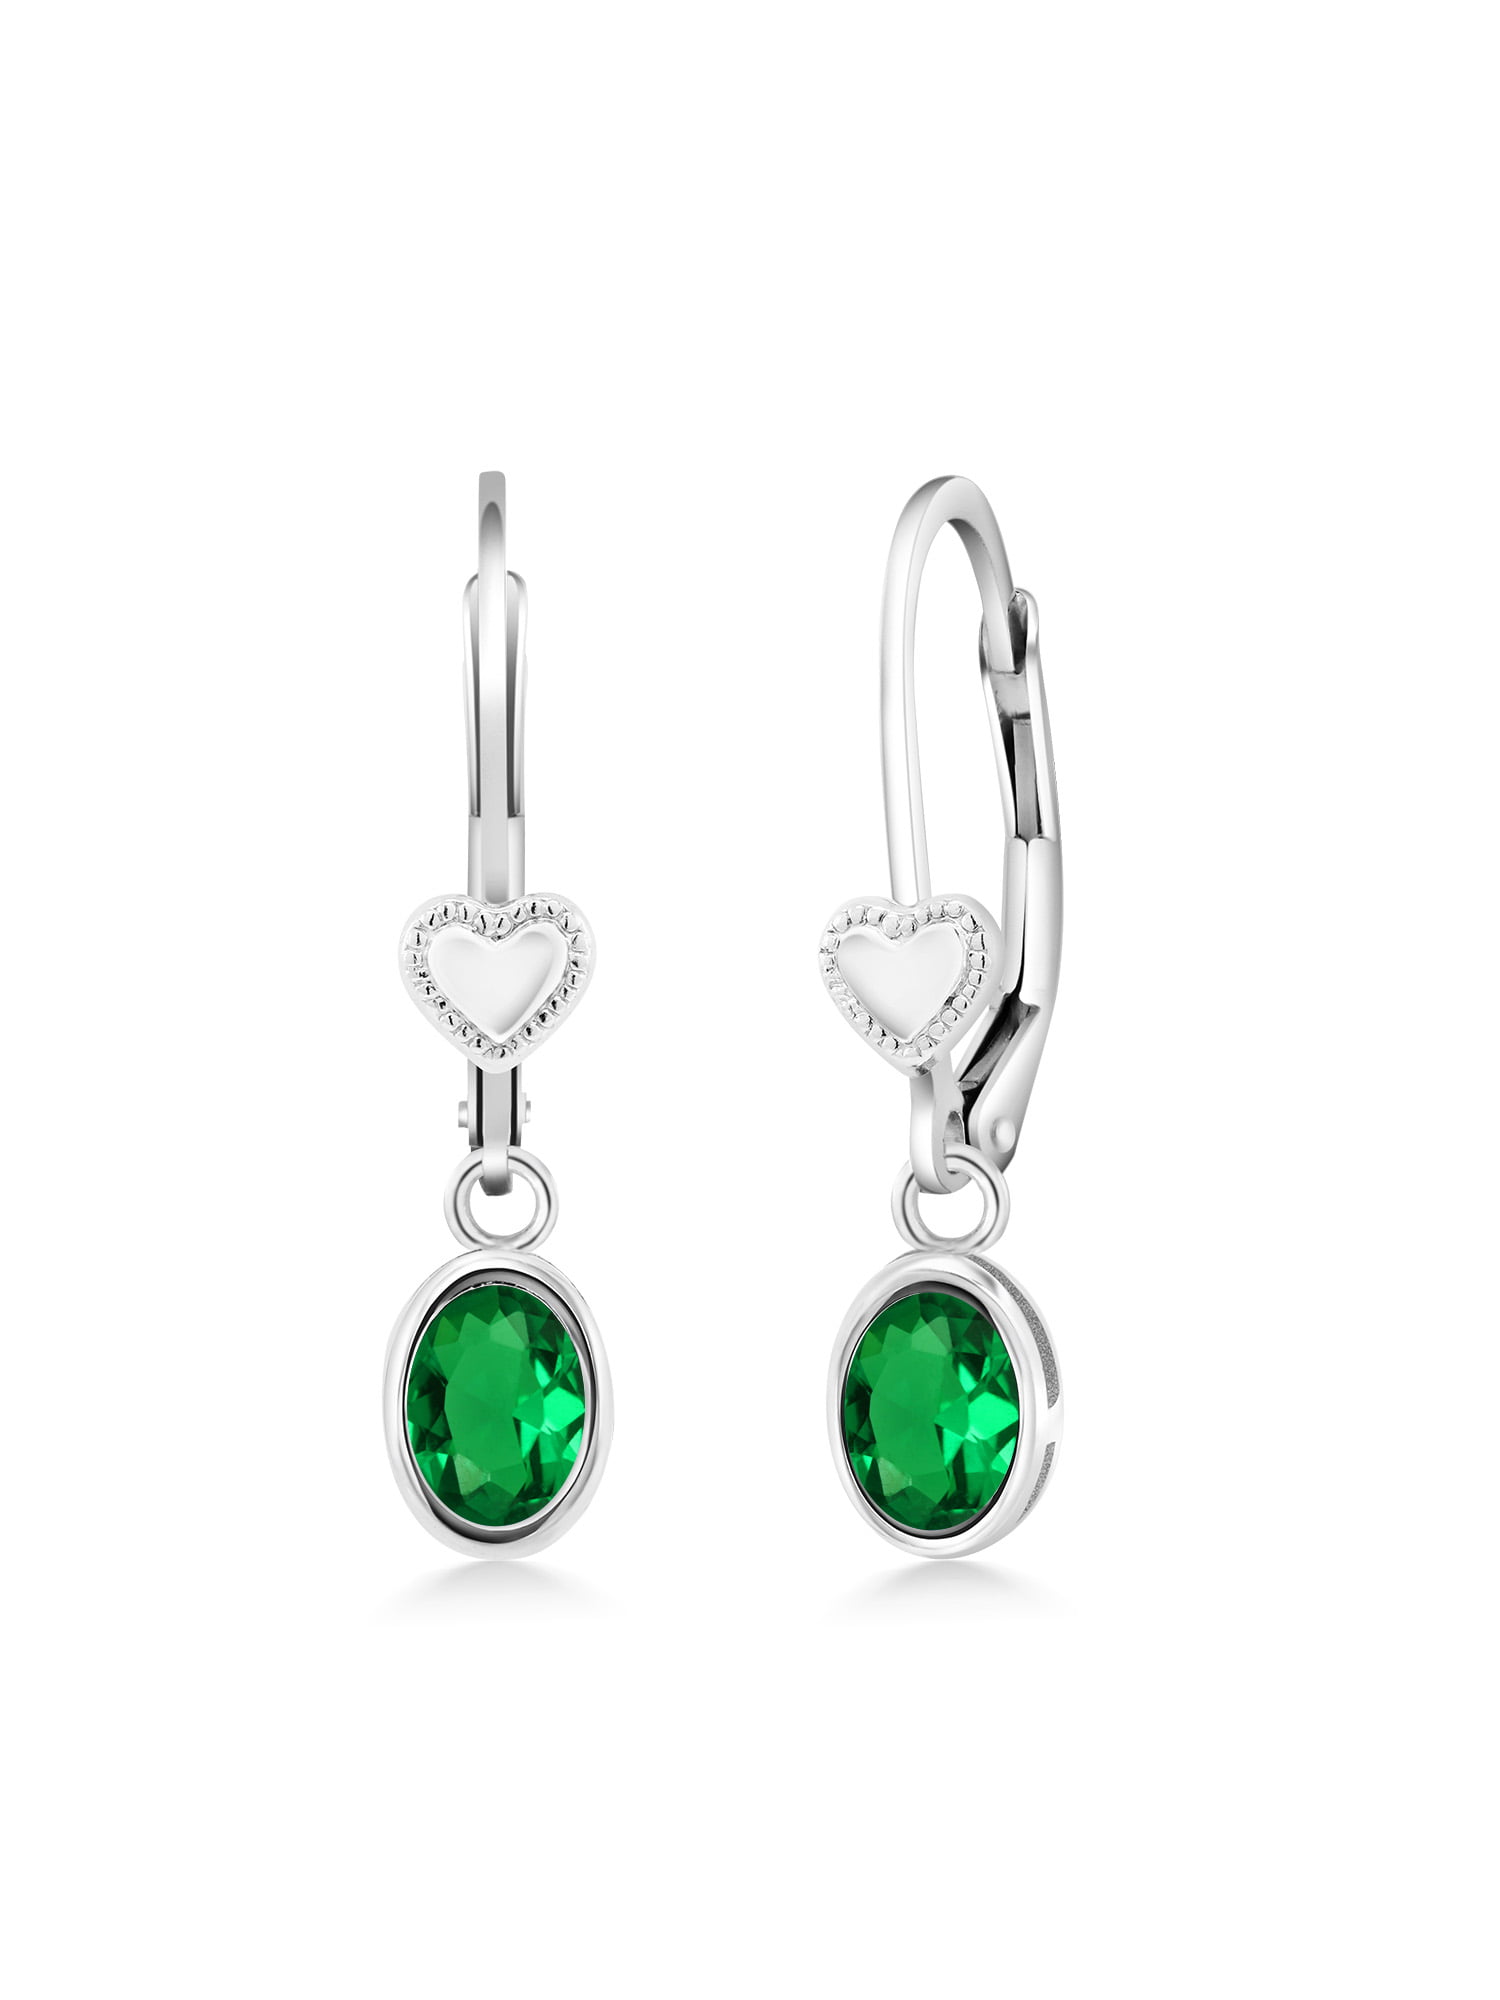 1.20 Ct Oval Simulated Emerald 925 Sterling Silver Leverback leverback earrings